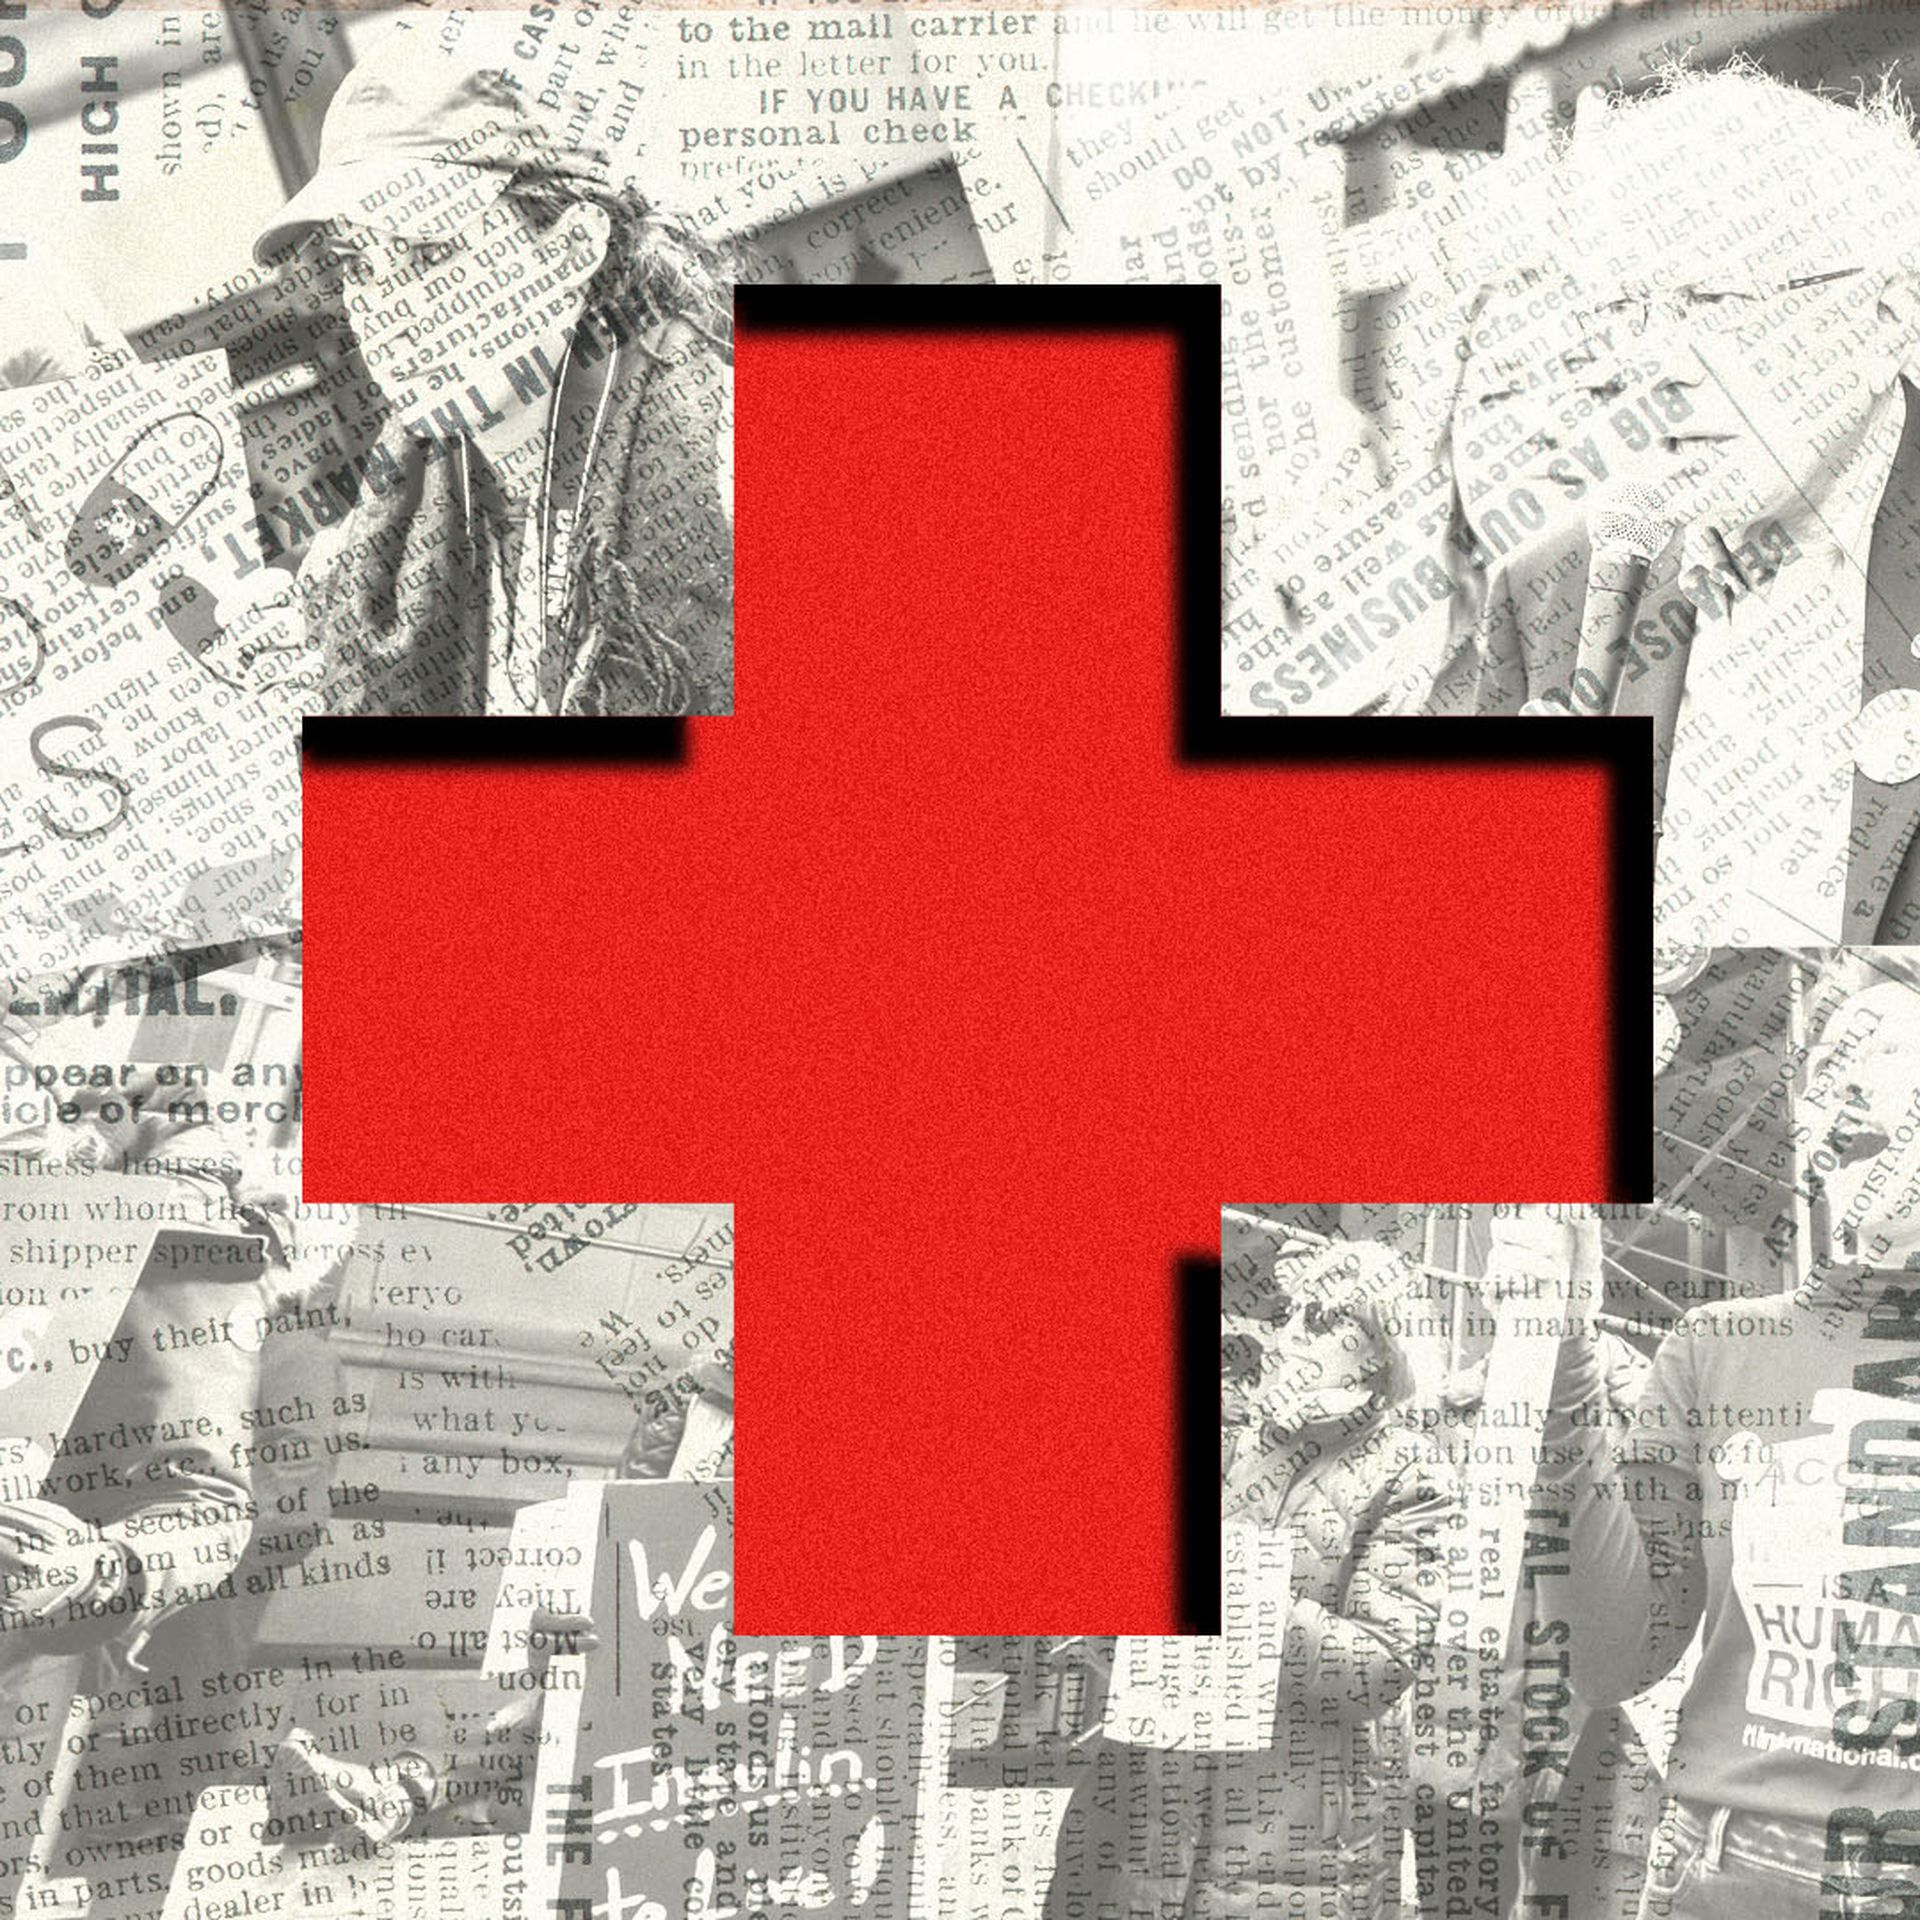 Photo illustration of people protesting health care costs and Democratic presidential candidate Bernie Sanders, overlaid with a red cross